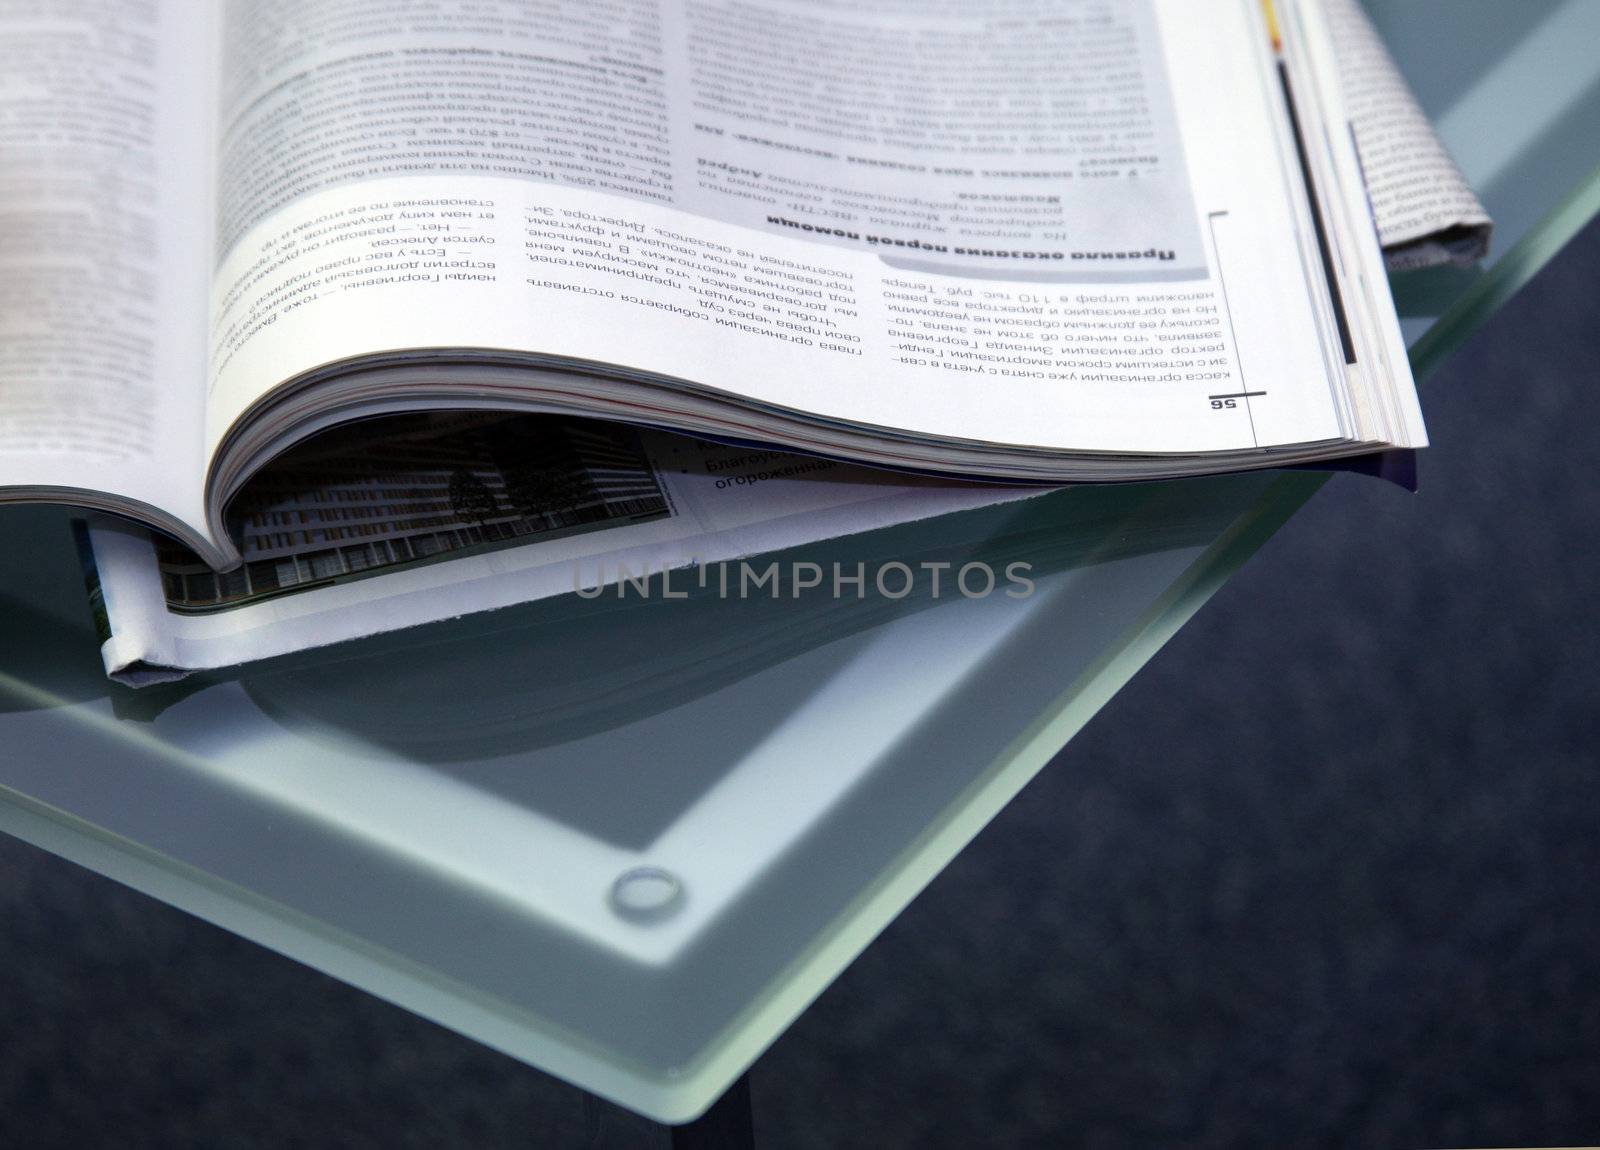 Open magazines on a glass table